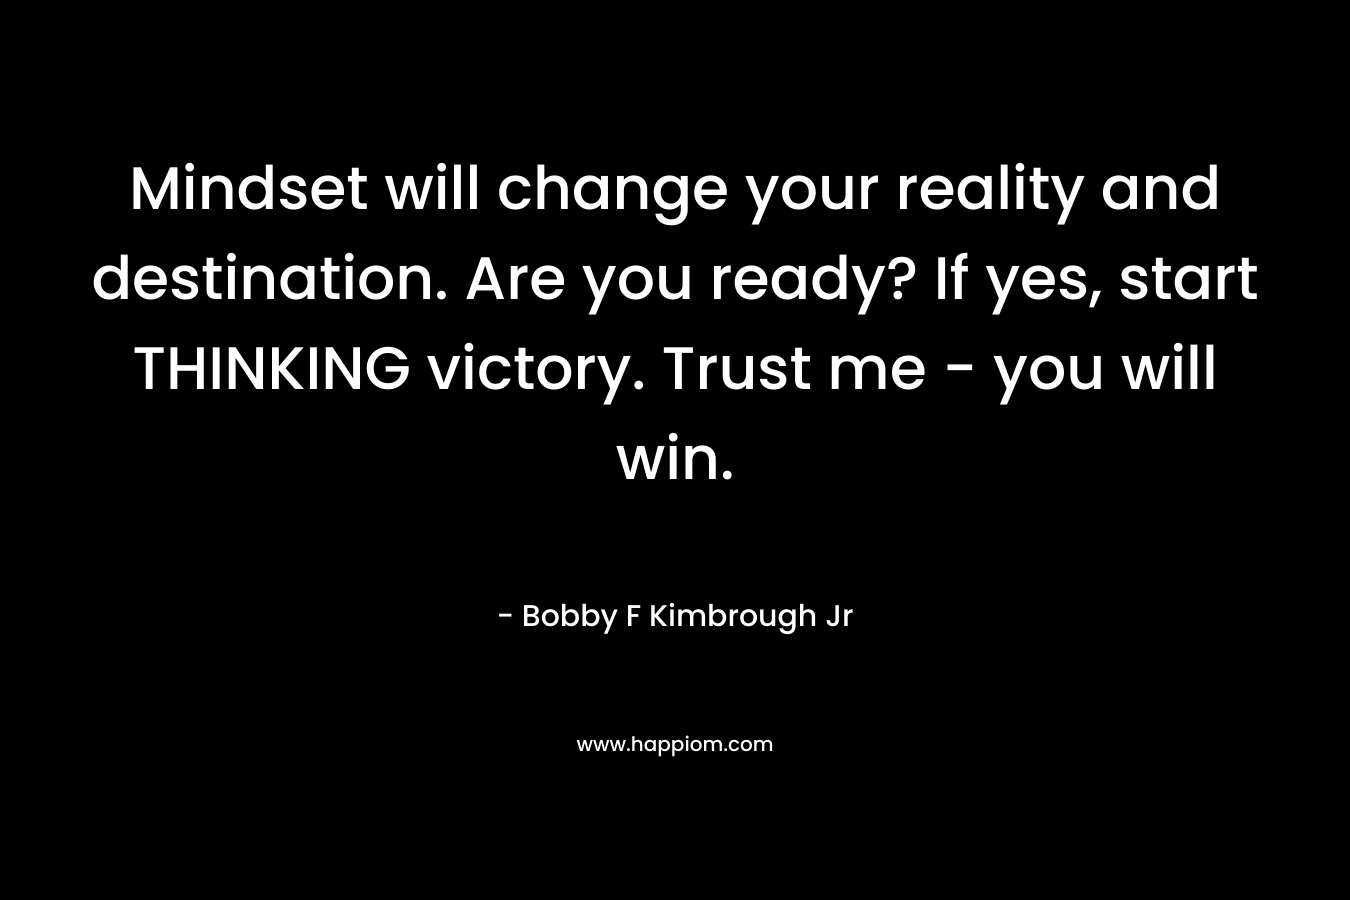 Mindset will change your reality and destination. Are you ready? If yes, start THINKING victory. Trust me - you will win.